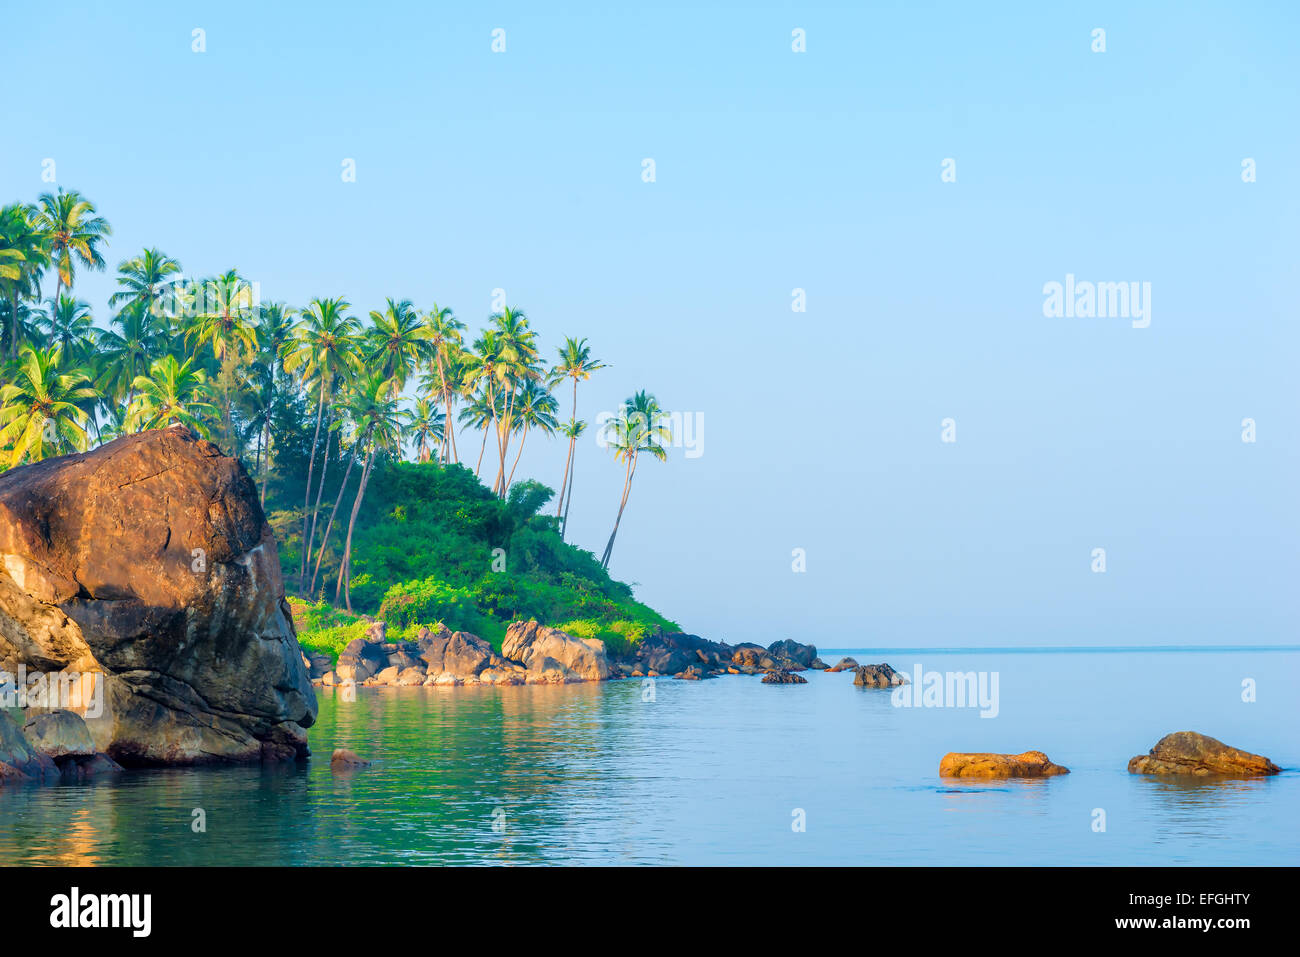 a large boulder in a calm sea and palm trees Stock Photo